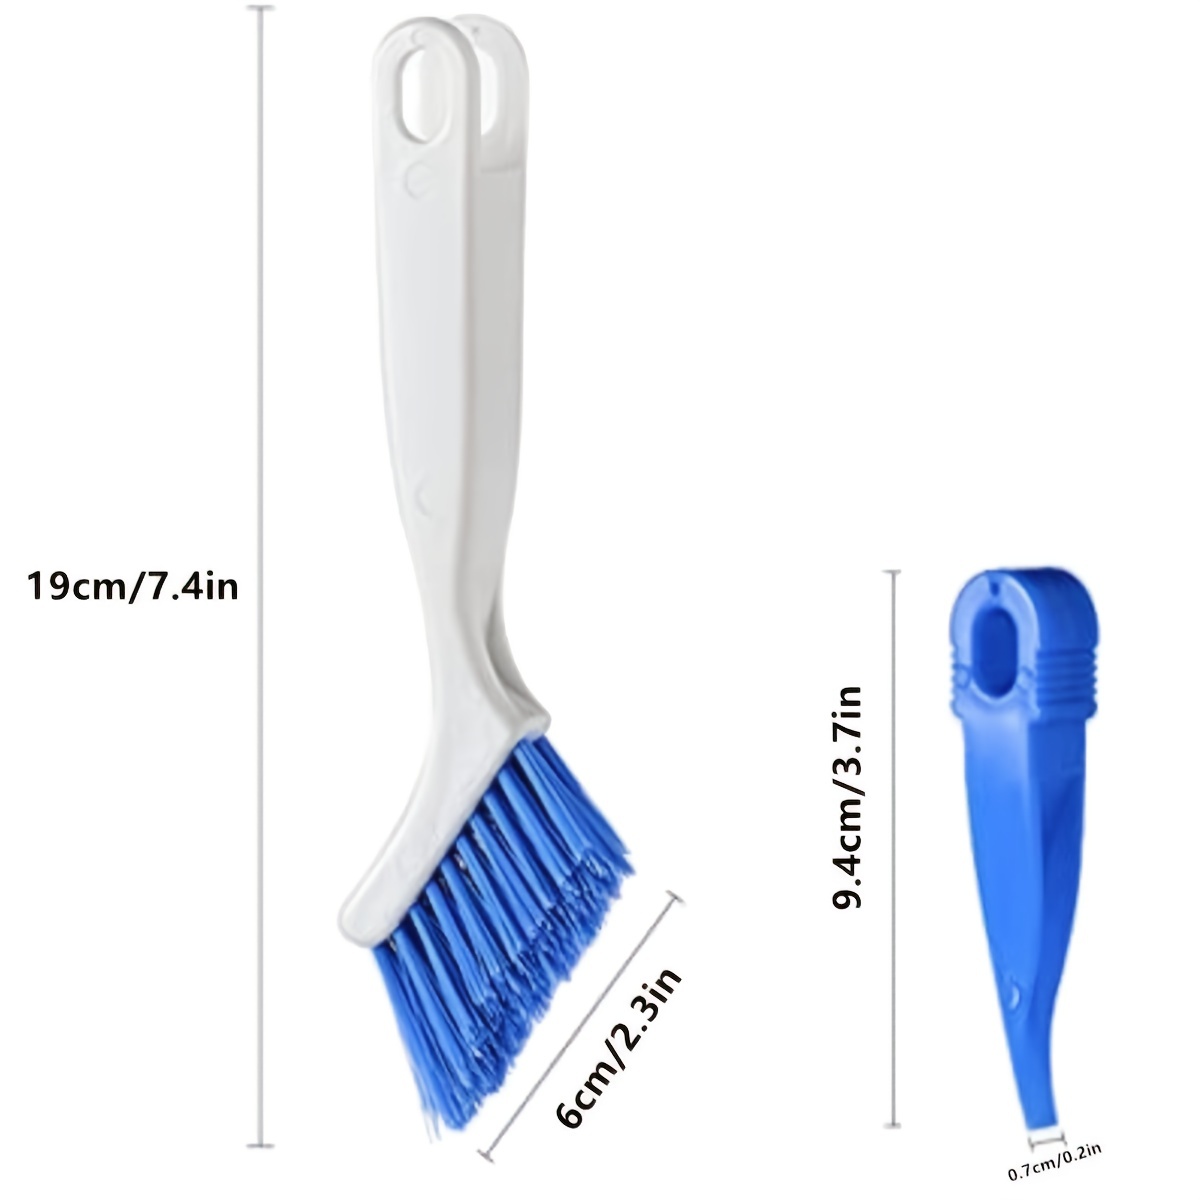 Living & Giving Grout Brush, (4 in 1) Grout Cleaner Brush, Tile Joint Scrub Brush with Handle, Stiff Cleaning Brush for All of The Household Such